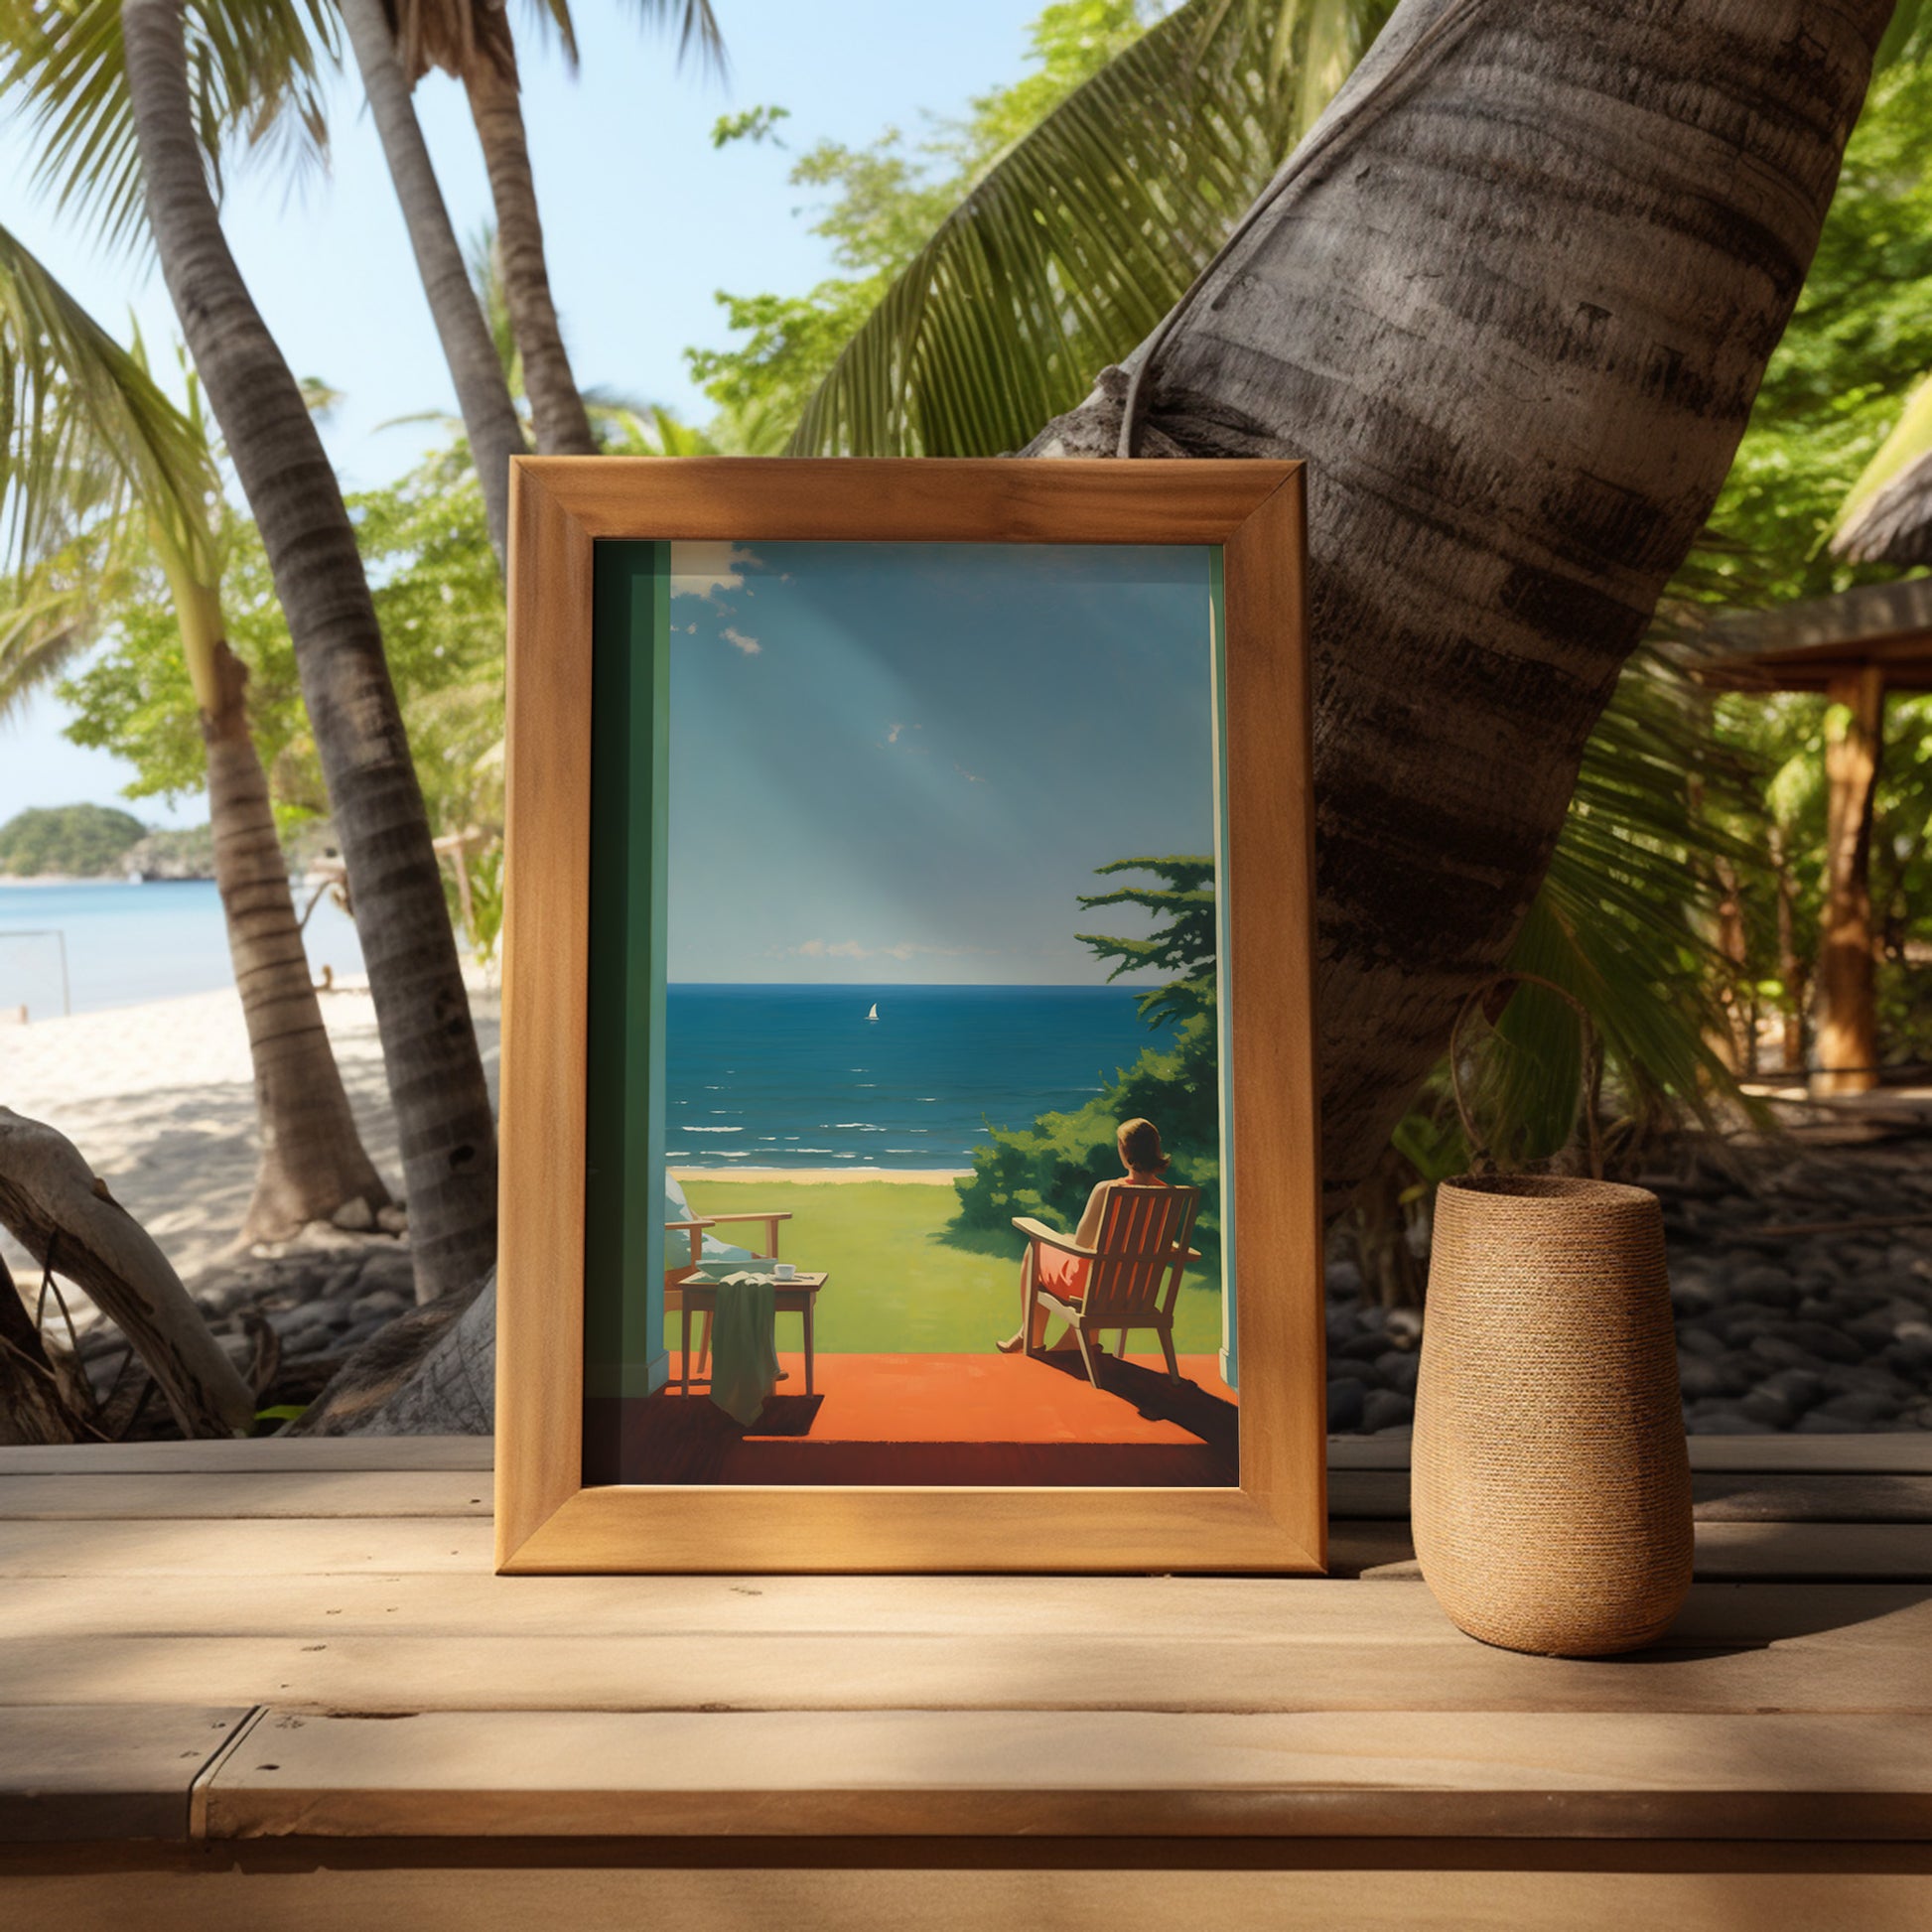 A framed painting of a person sitting by the sea, placed on a wooden deck with tropical surroundings.